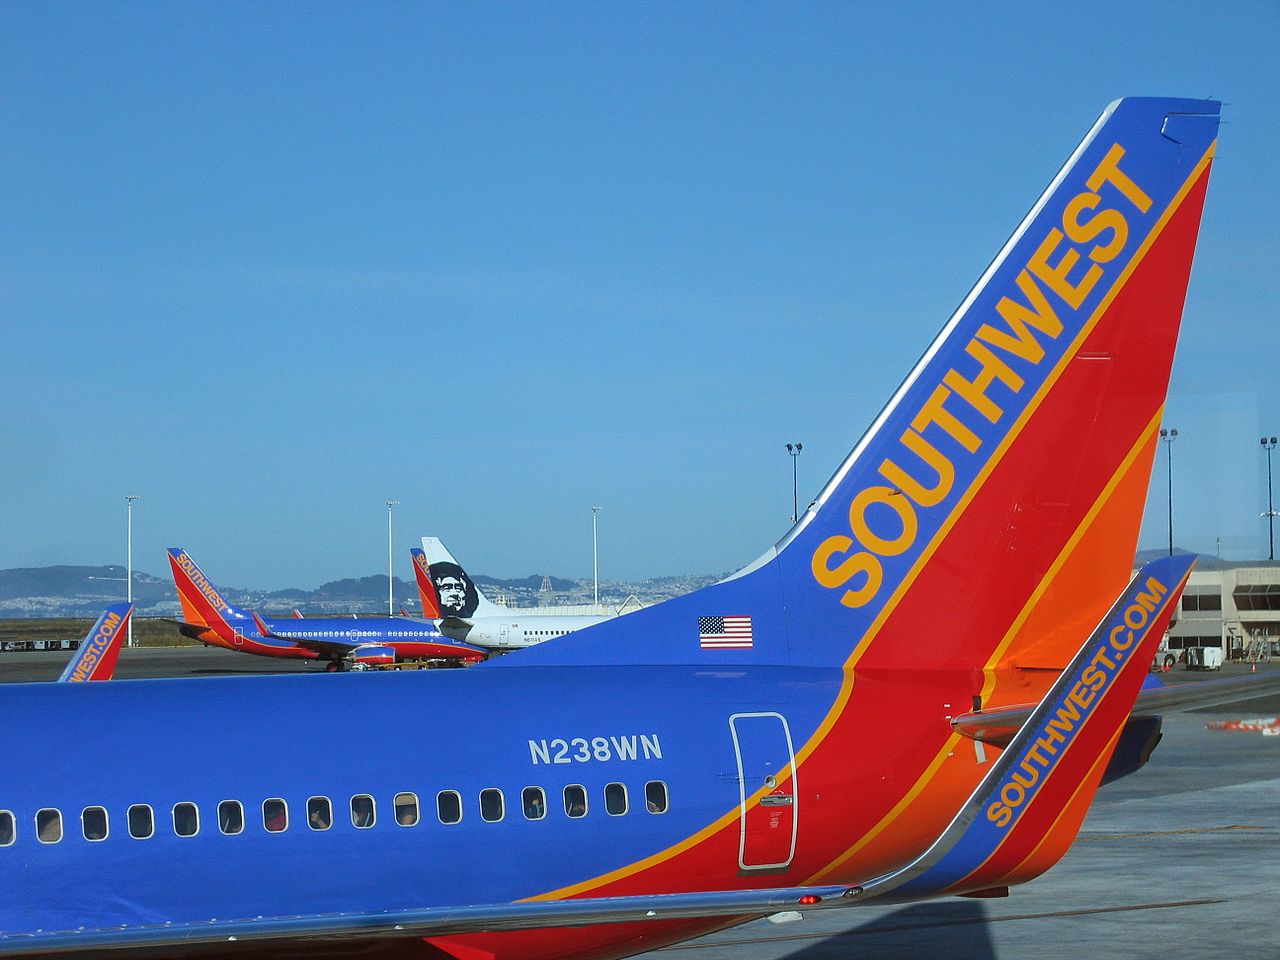 The tailplane of a parked Southwest Airlines plane.